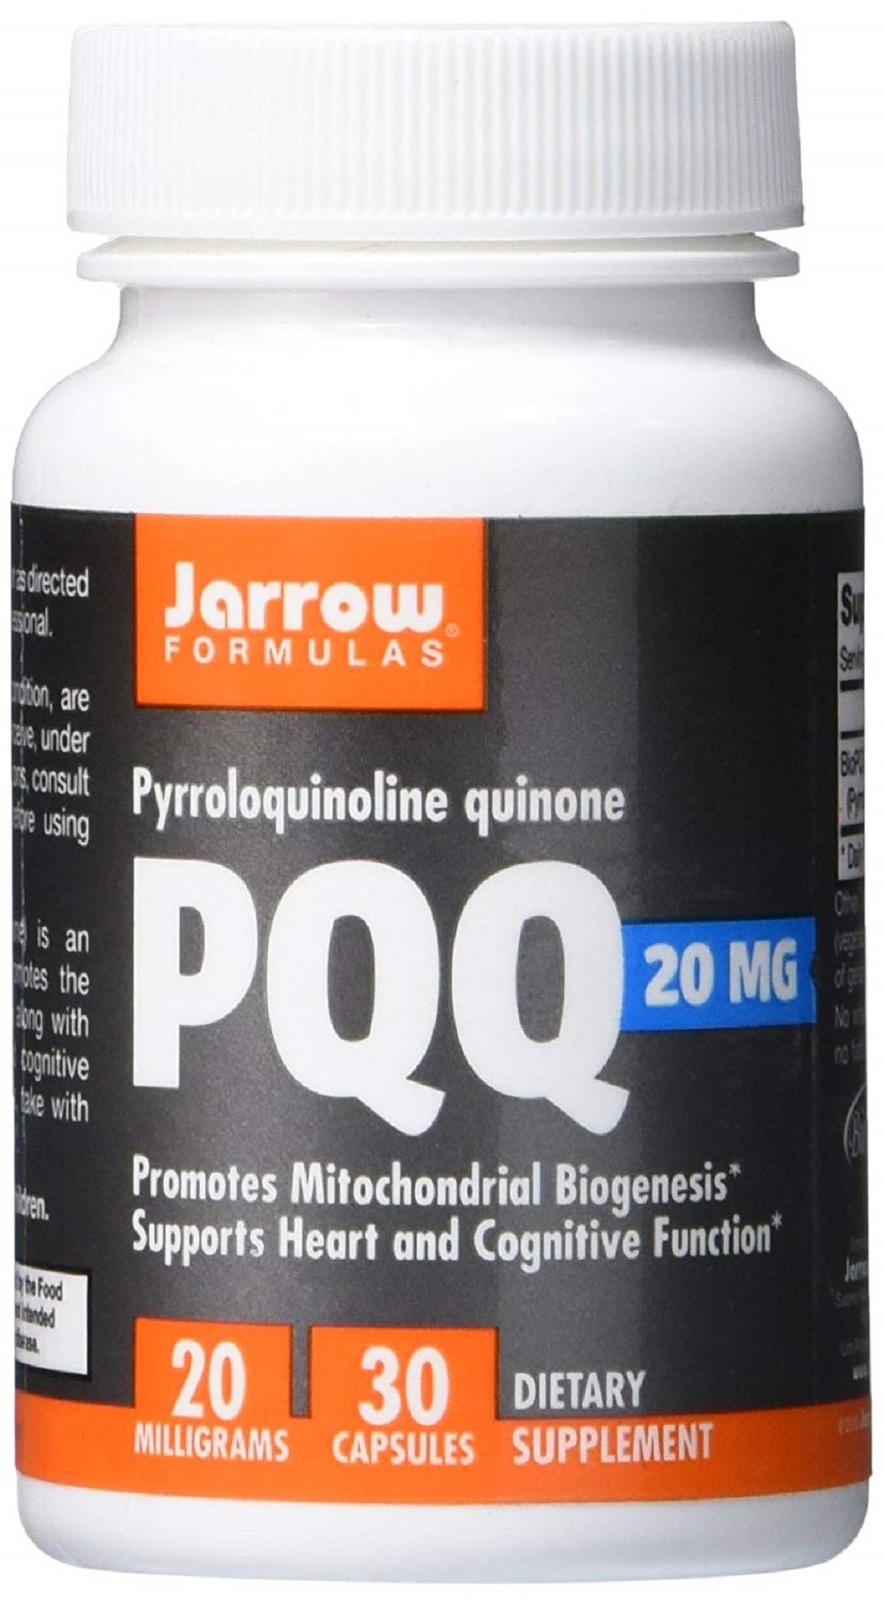 Pyrroloquinoline Quinone, Supports Heart and Cognitive Function, 20 mg, 30 Caps